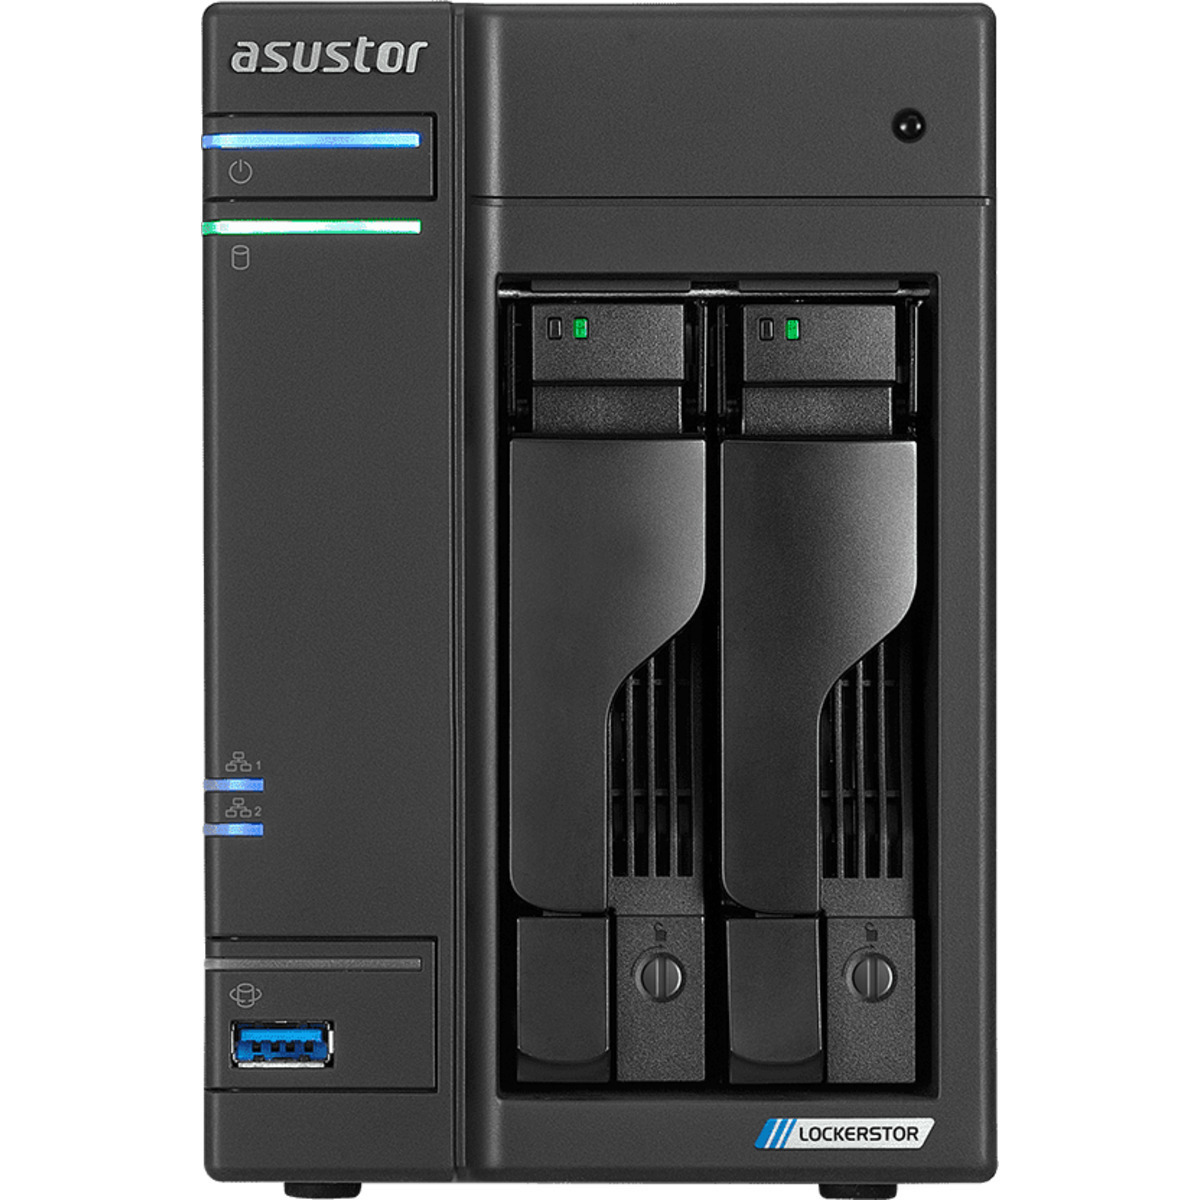 ASUSTOR AS6602T Lockerstor 2 16tb 2-Bay Desktop Multimedia / Power User / Business NAS - Network Attached Storage Device 1x16tb Western Digital Red Pro WD161KFGX 3.5 7200rpm SATA 6Gb/s HDD NAS Class Drives Installed - Burn-In Tested - FREE RAM UPGRADE AS6602T Lockerstor 2